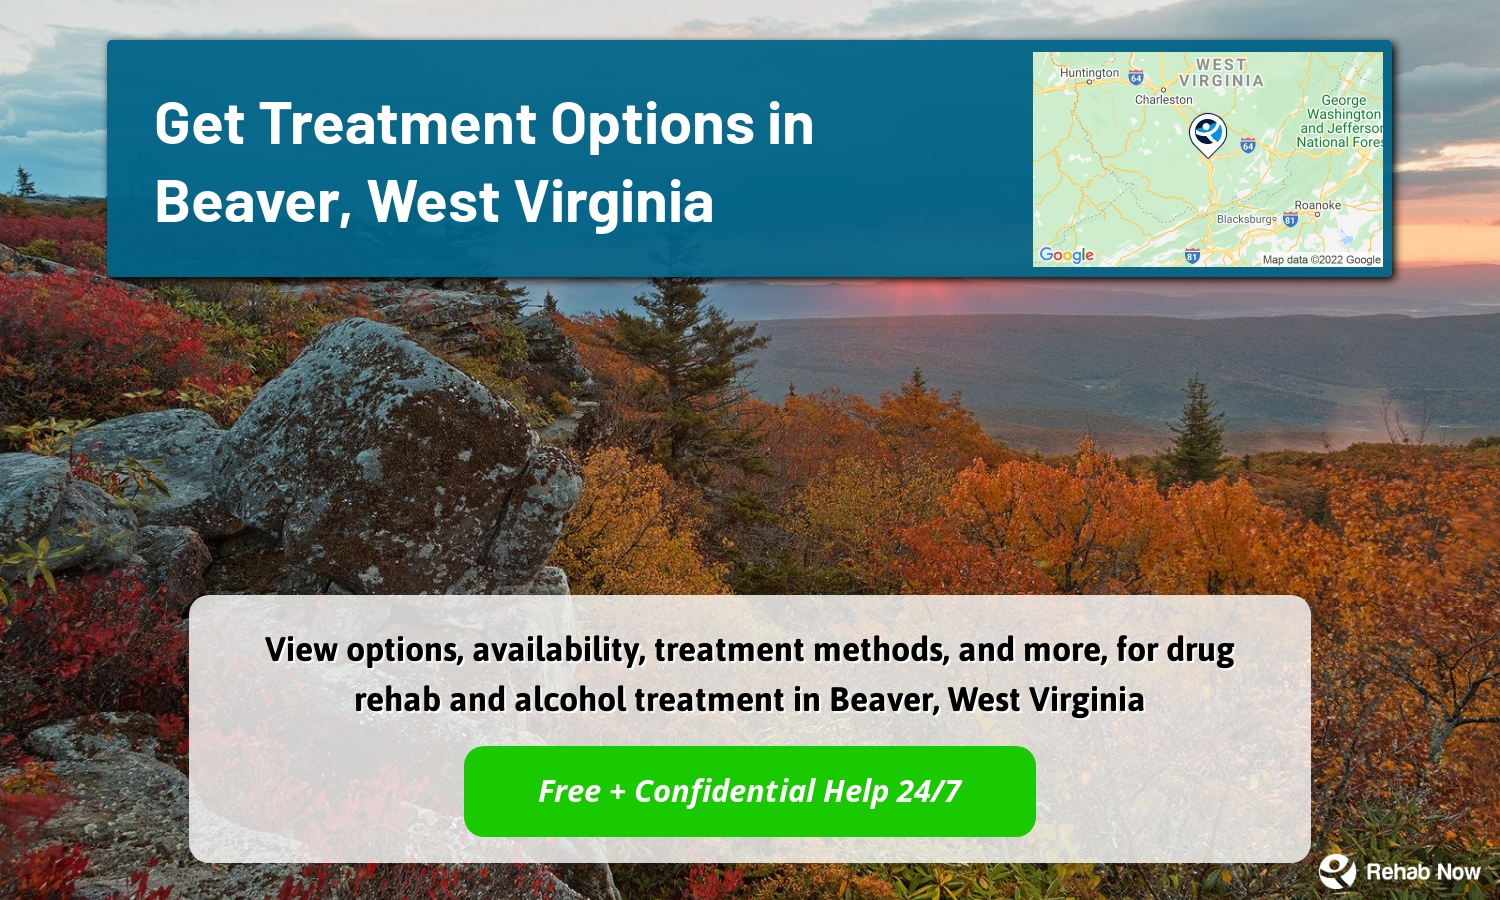 View options, availability, treatment methods, and more, for drug rehab and alcohol treatment in Beaver, West Virginia